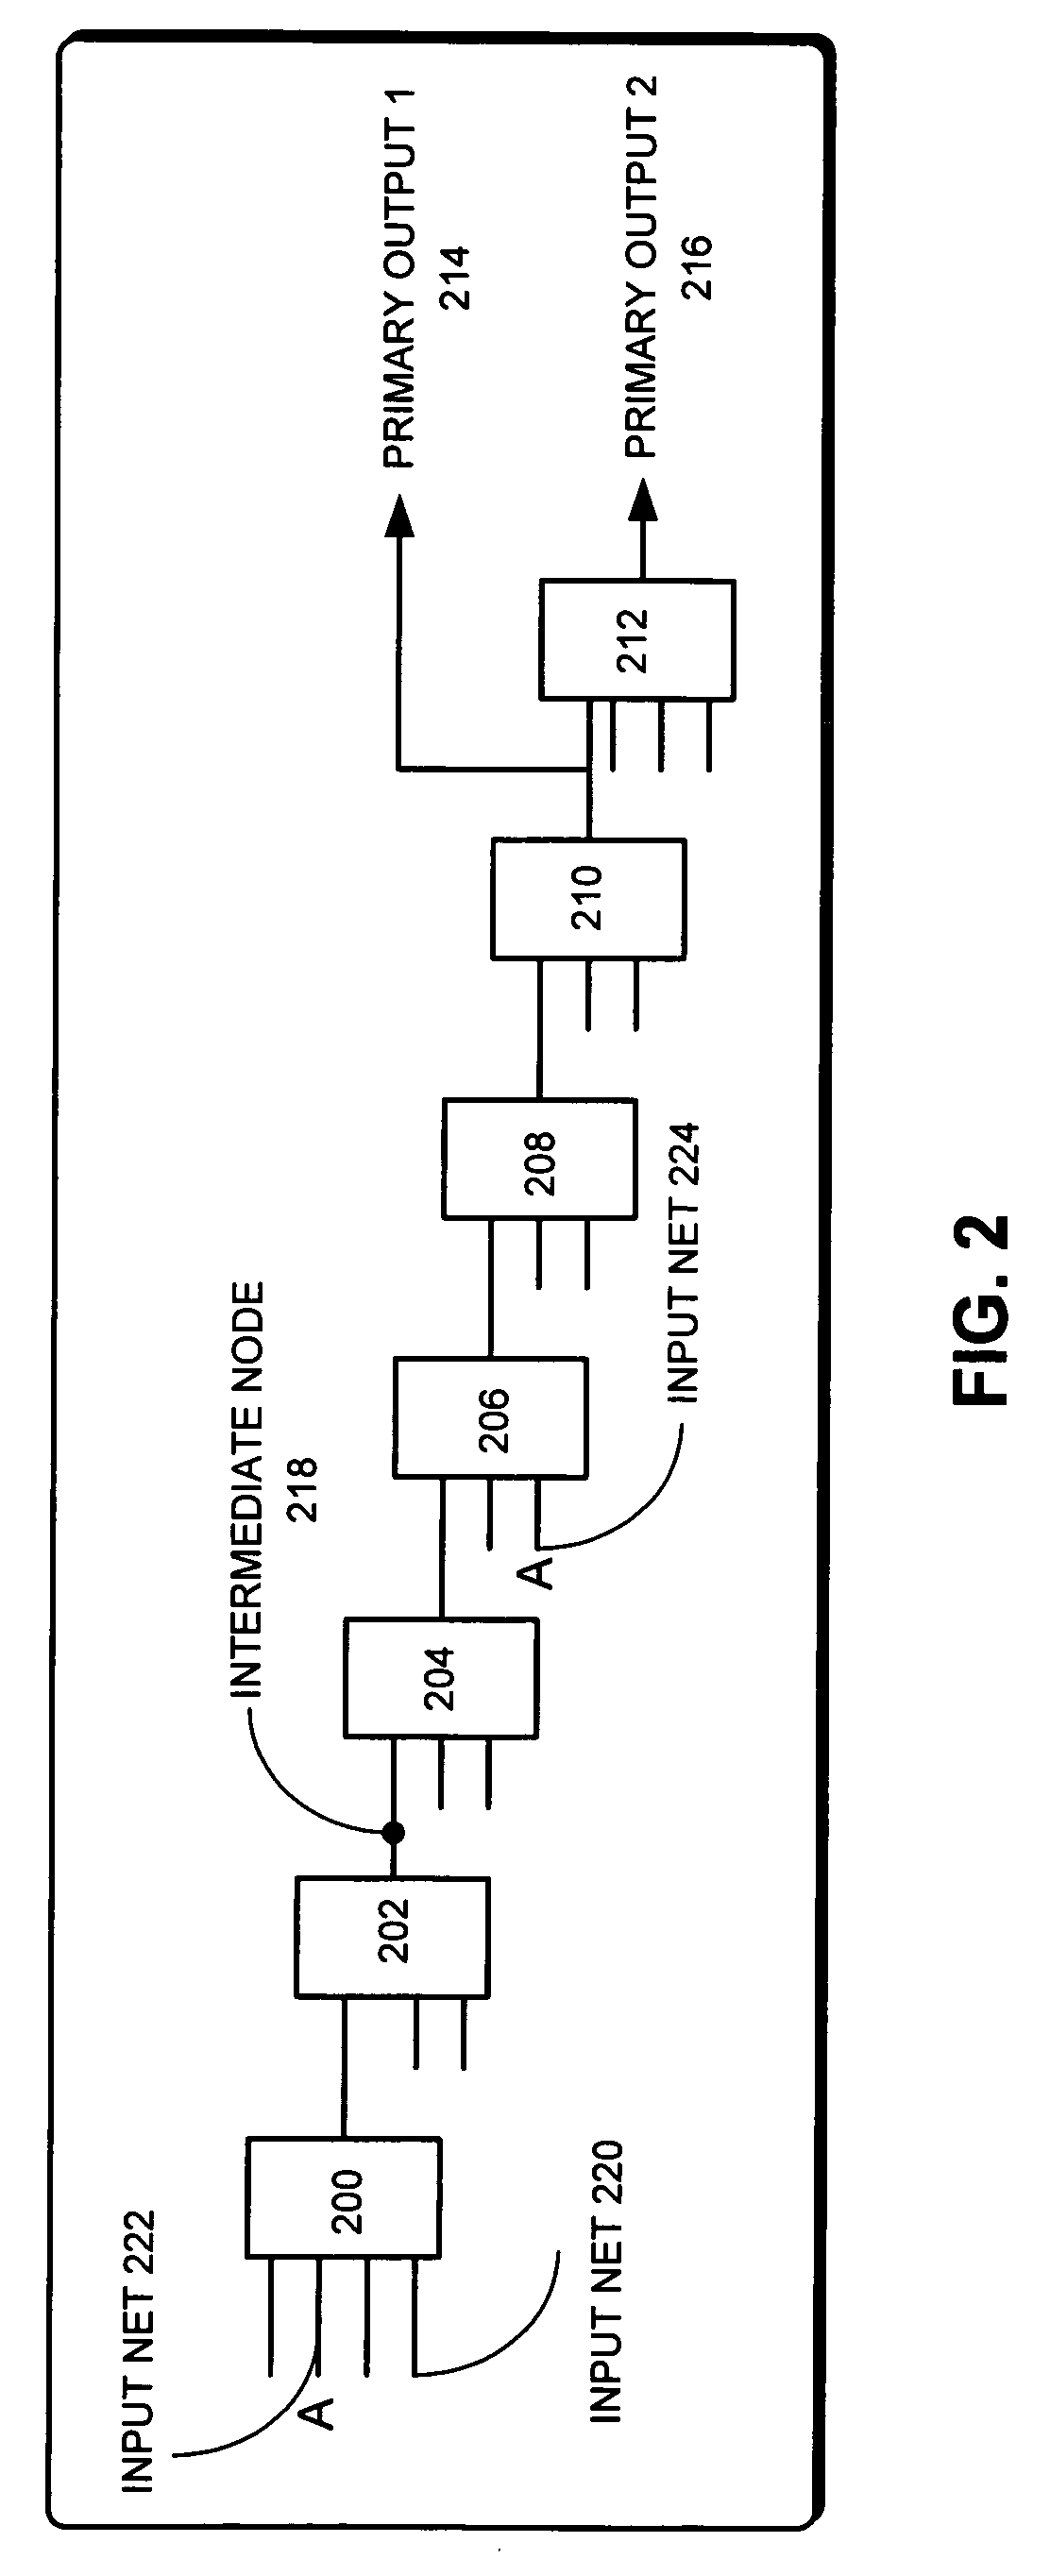 Method and apparatus for optimizing a logic network in a digital circuit